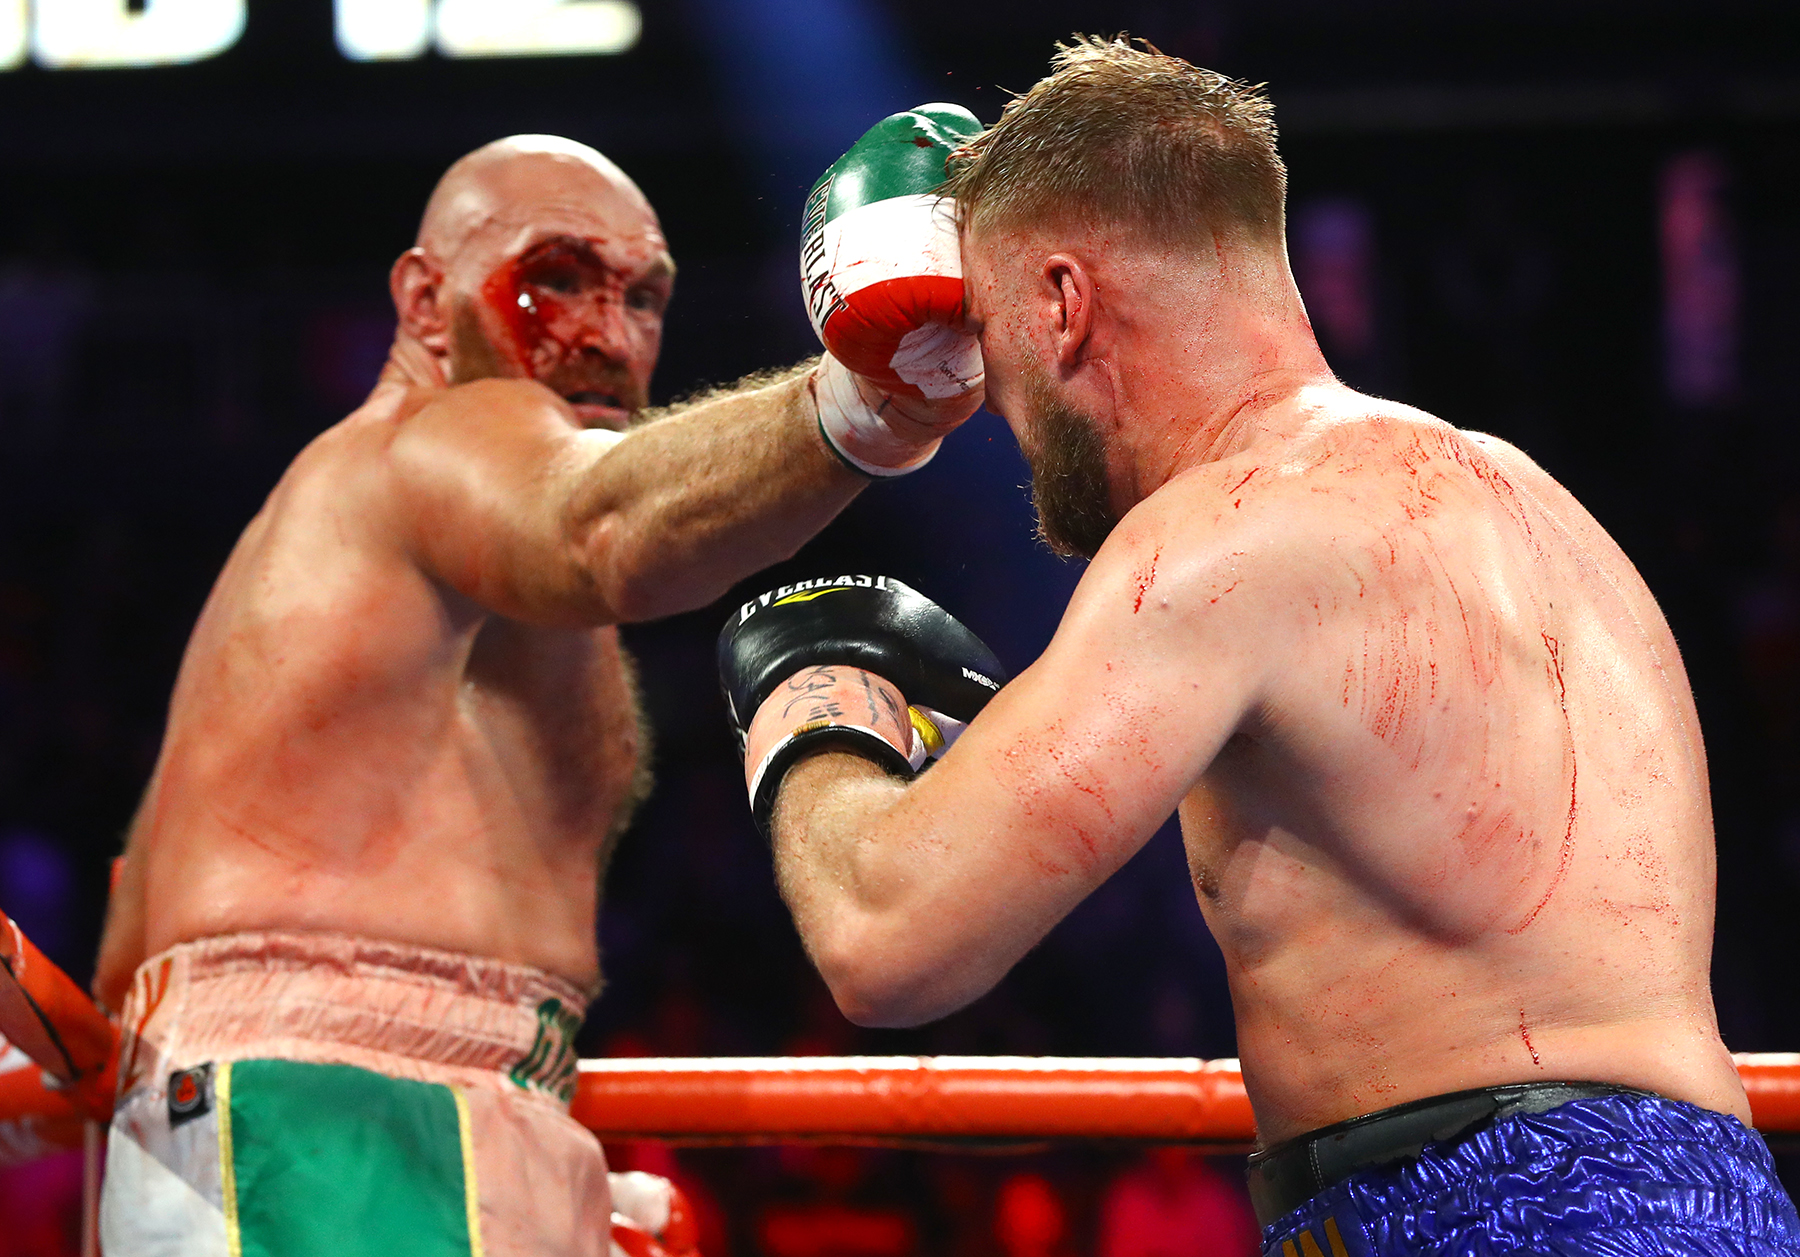 Ring Ratings Update: Tyson Fury holds onto top heavyweight spot - The Ring